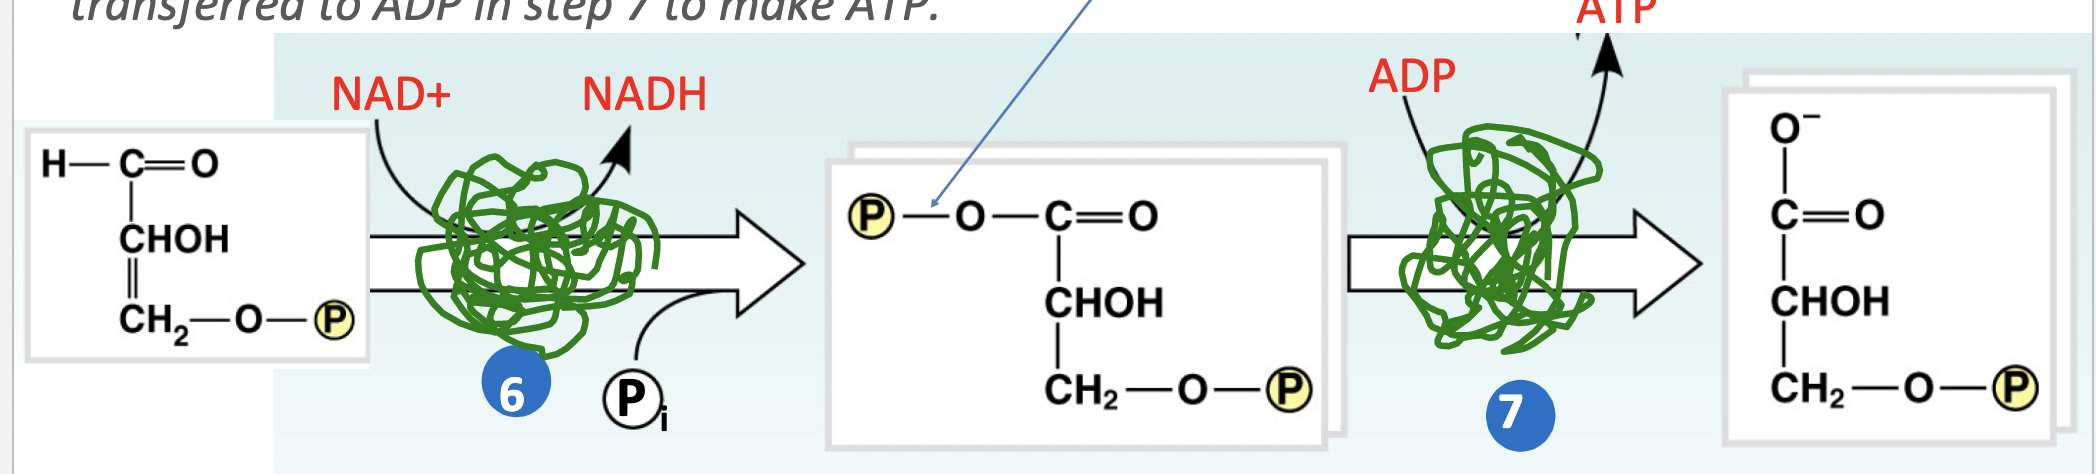 <p>the oxidation/reduction step.</p><p>In step 6 the sugar is oxidized and NAD+ is reduced.  \n This reaction is coupled to the synthesis of a high energy phosphate bond which is transferred to ADP in step 7 to make ATP. ( 4 ATP is made here)</p>